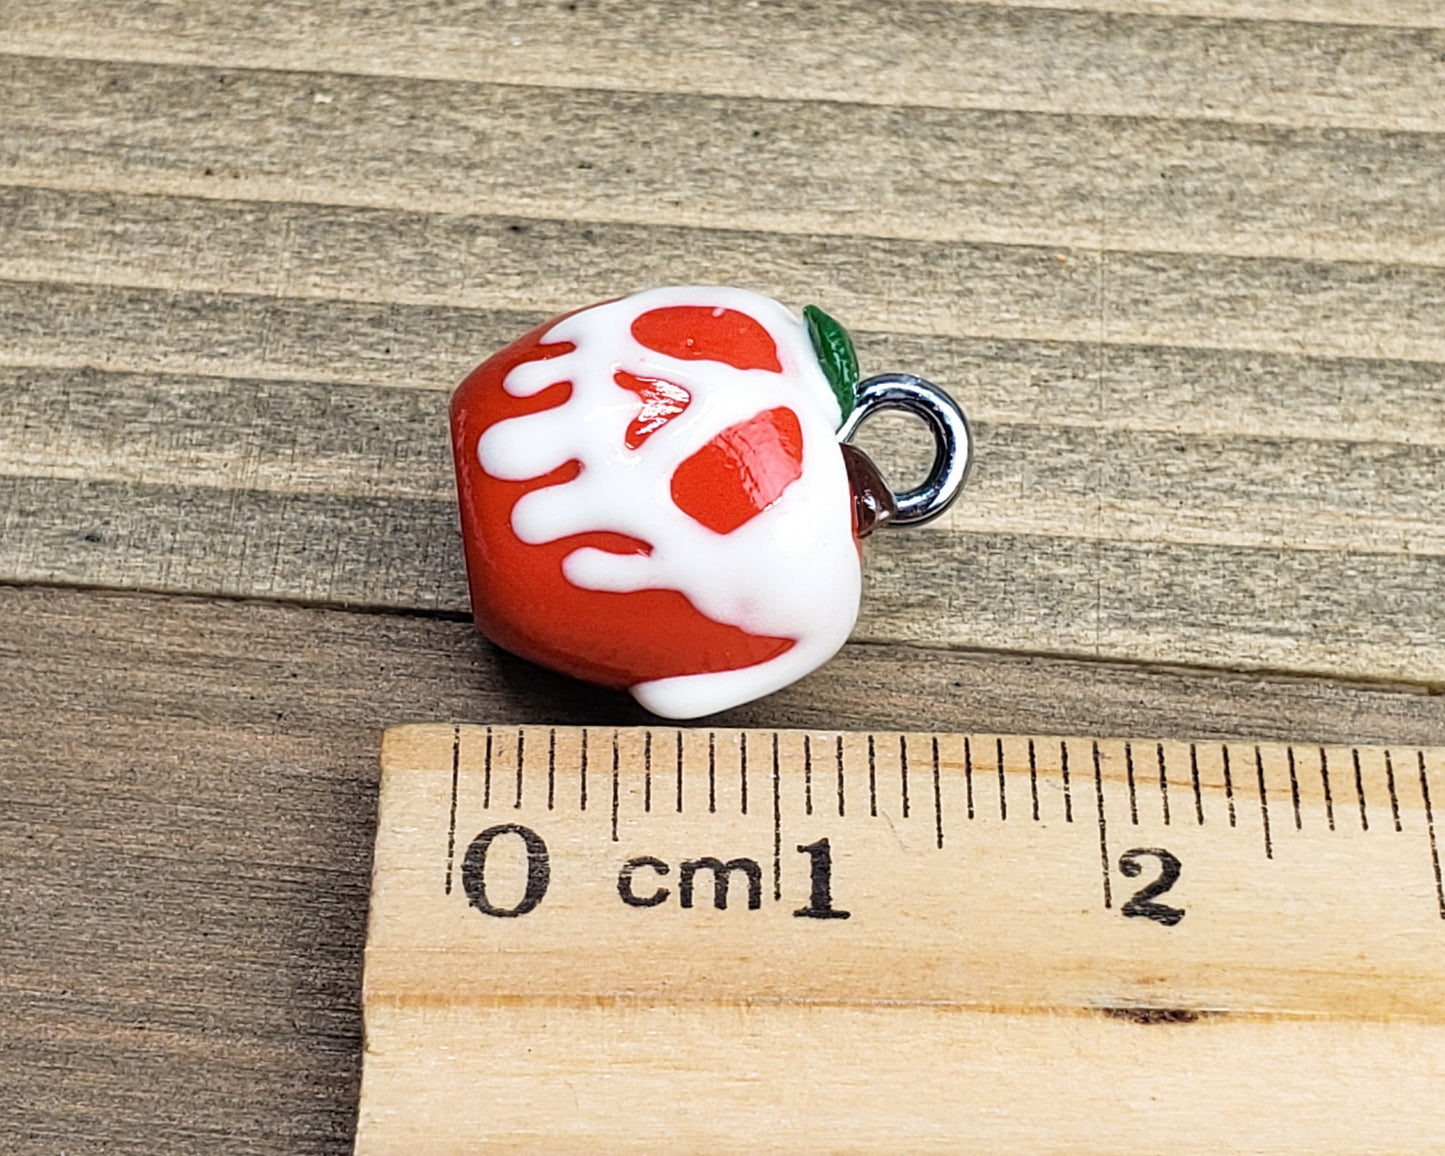 Red and White Poisoned Apple Charm